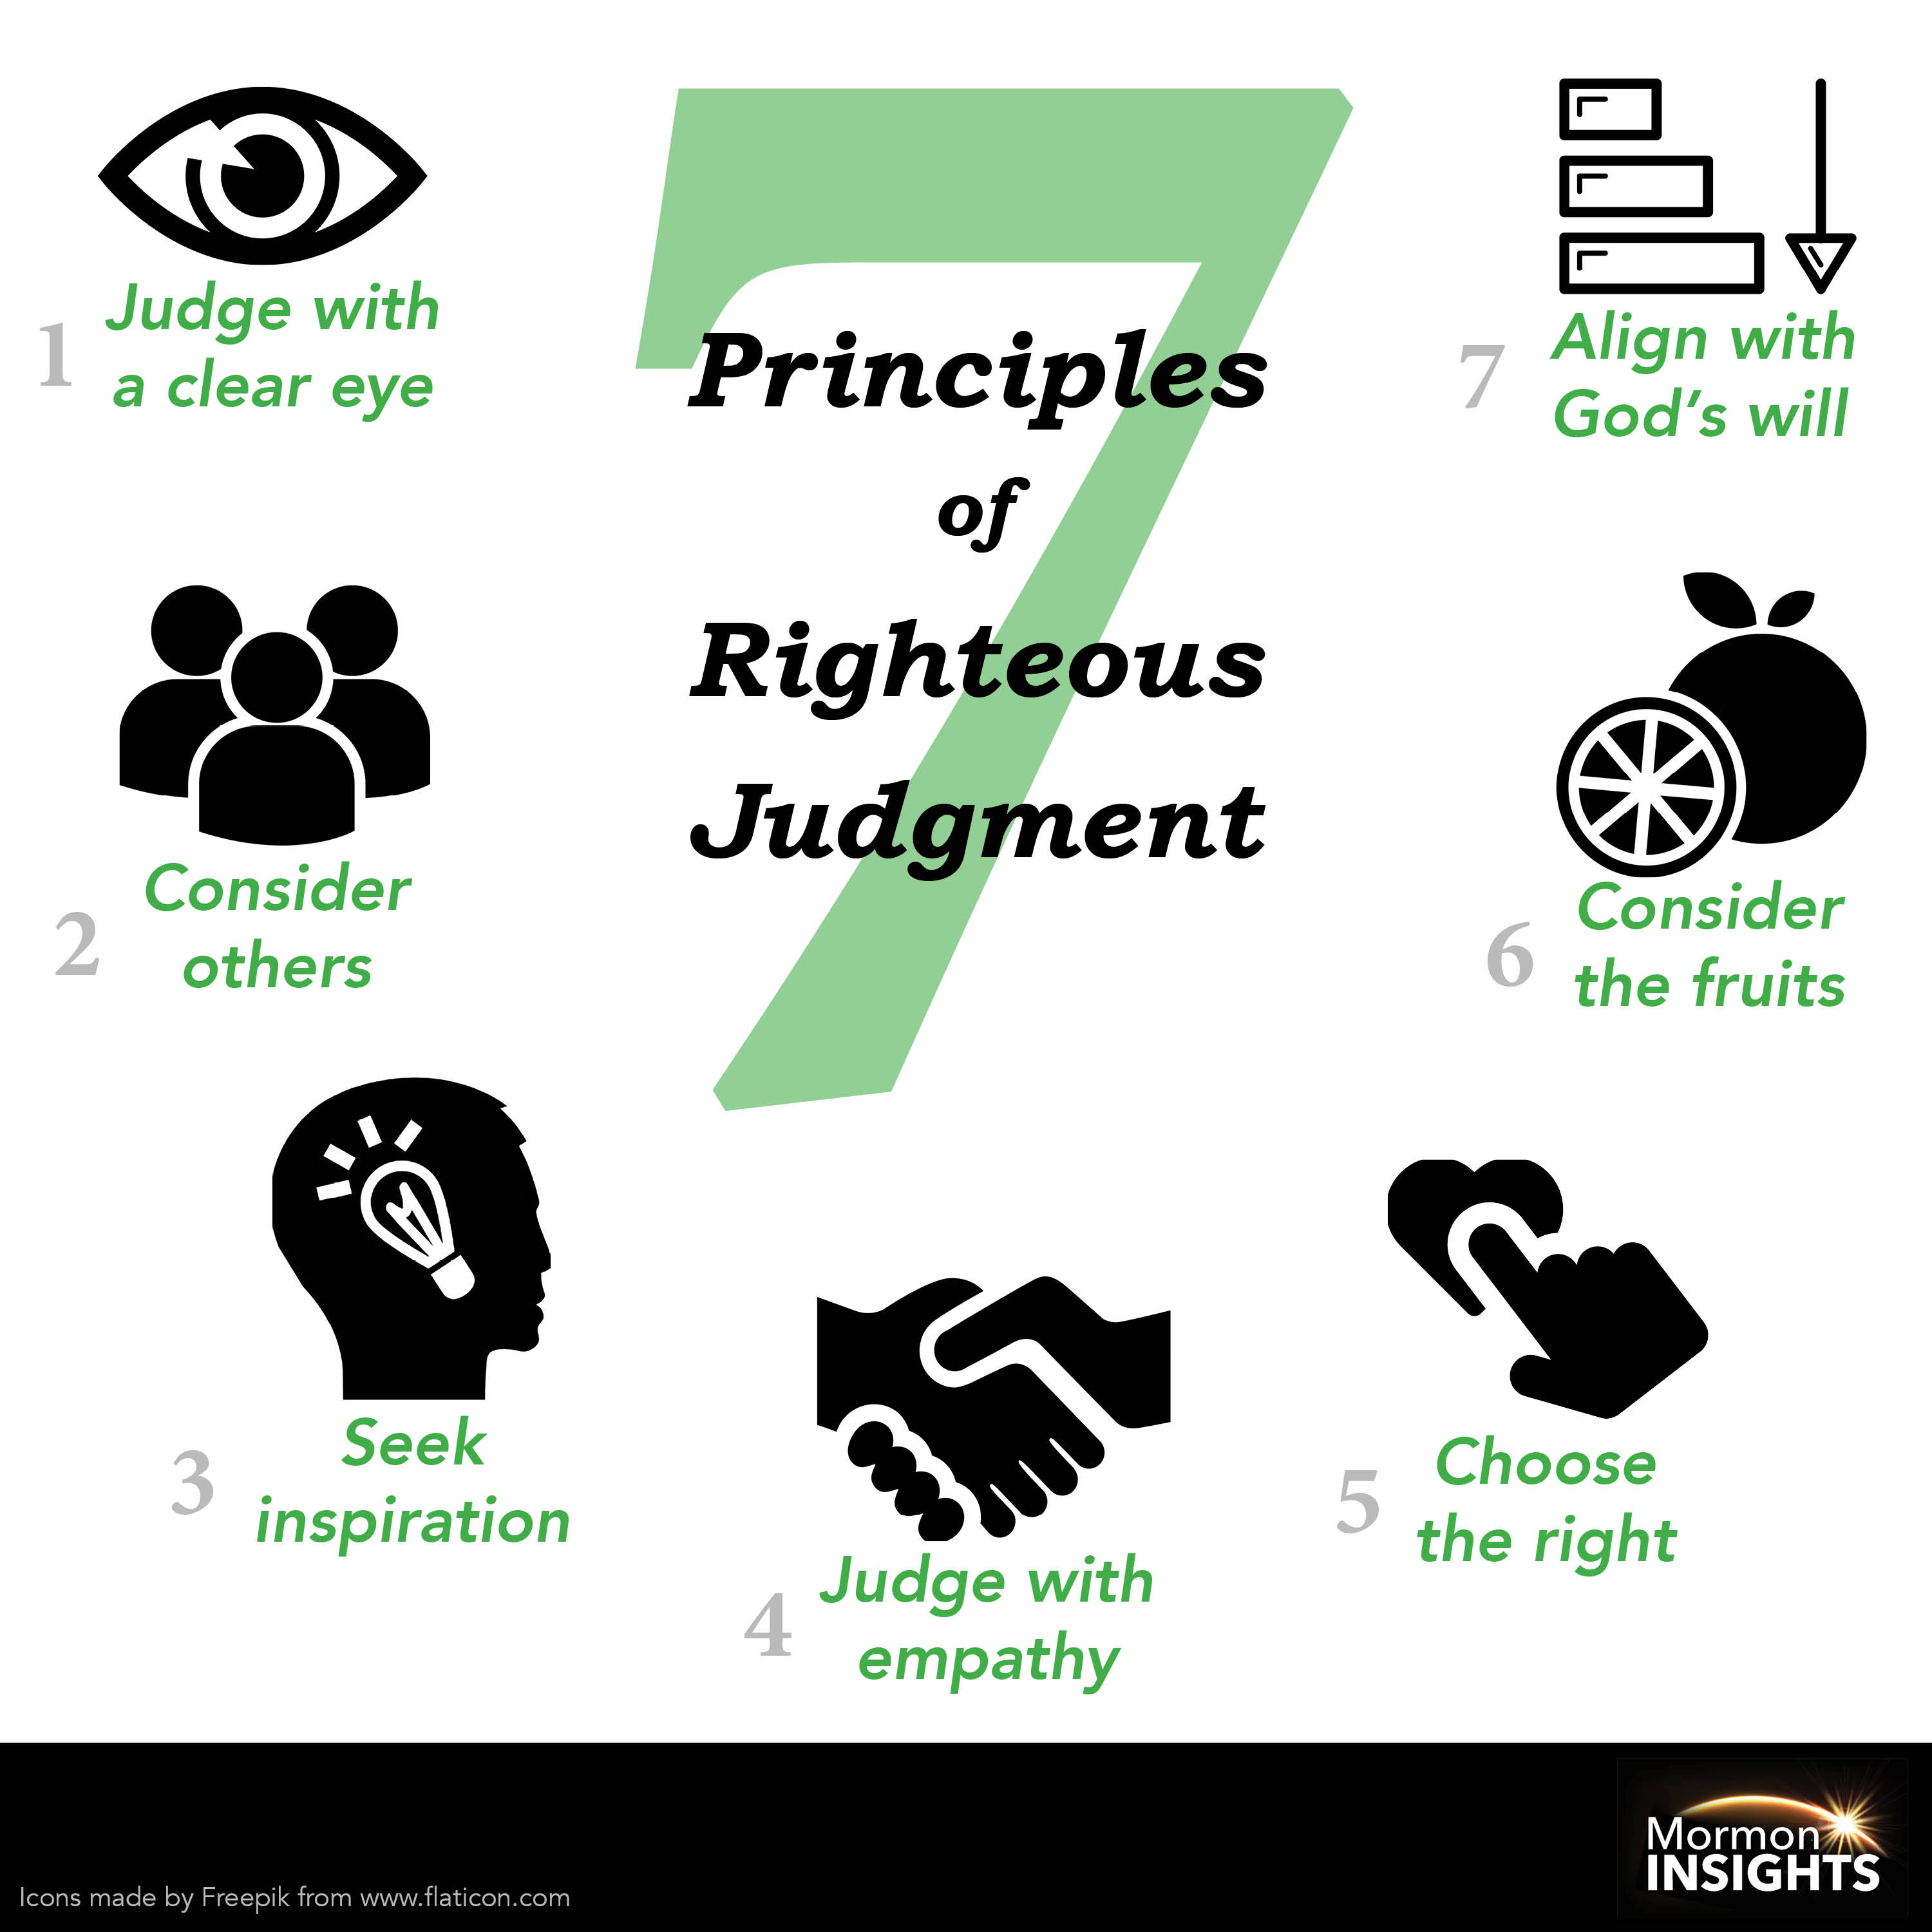 Infographic of 7 principles of righteous judgment: 1, judge with a clear eye; 2, consider others; 3, seek inspiration; 4, judge with empathy; 5, choose the right; 6, consider the fruits; and 7, align with God's will.